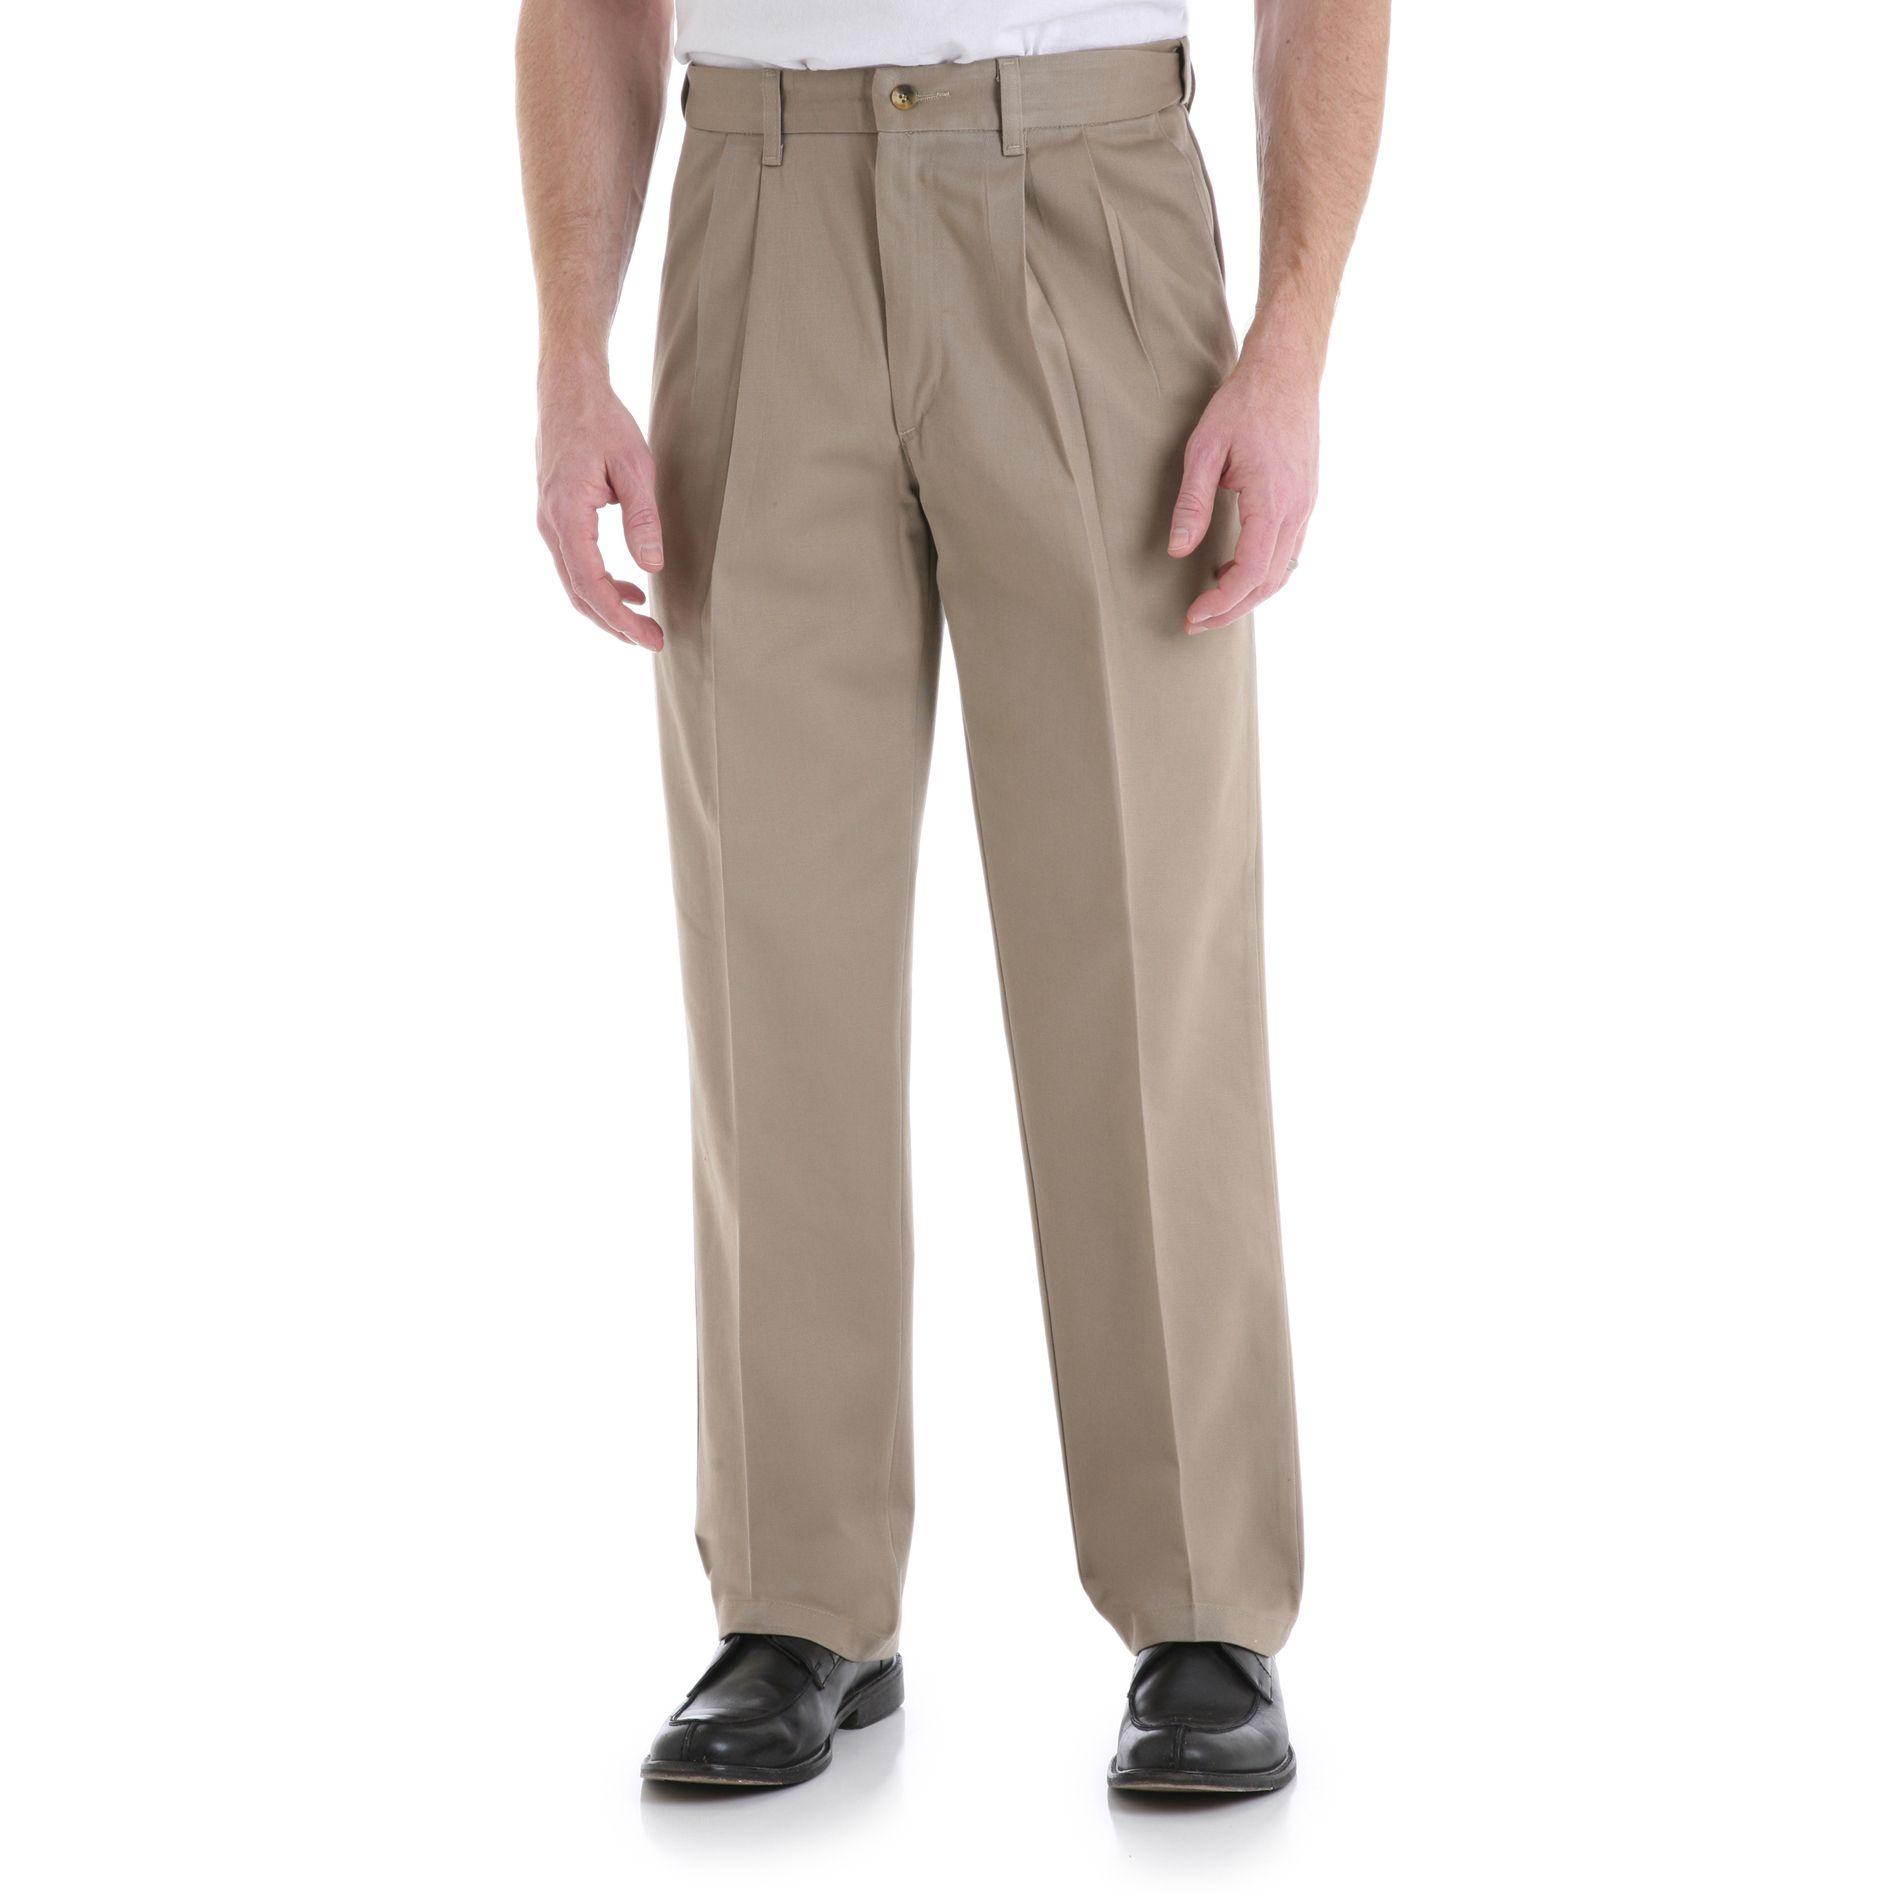 Timber Creek Men's Perfect Fit Pleat Front Casual Pant